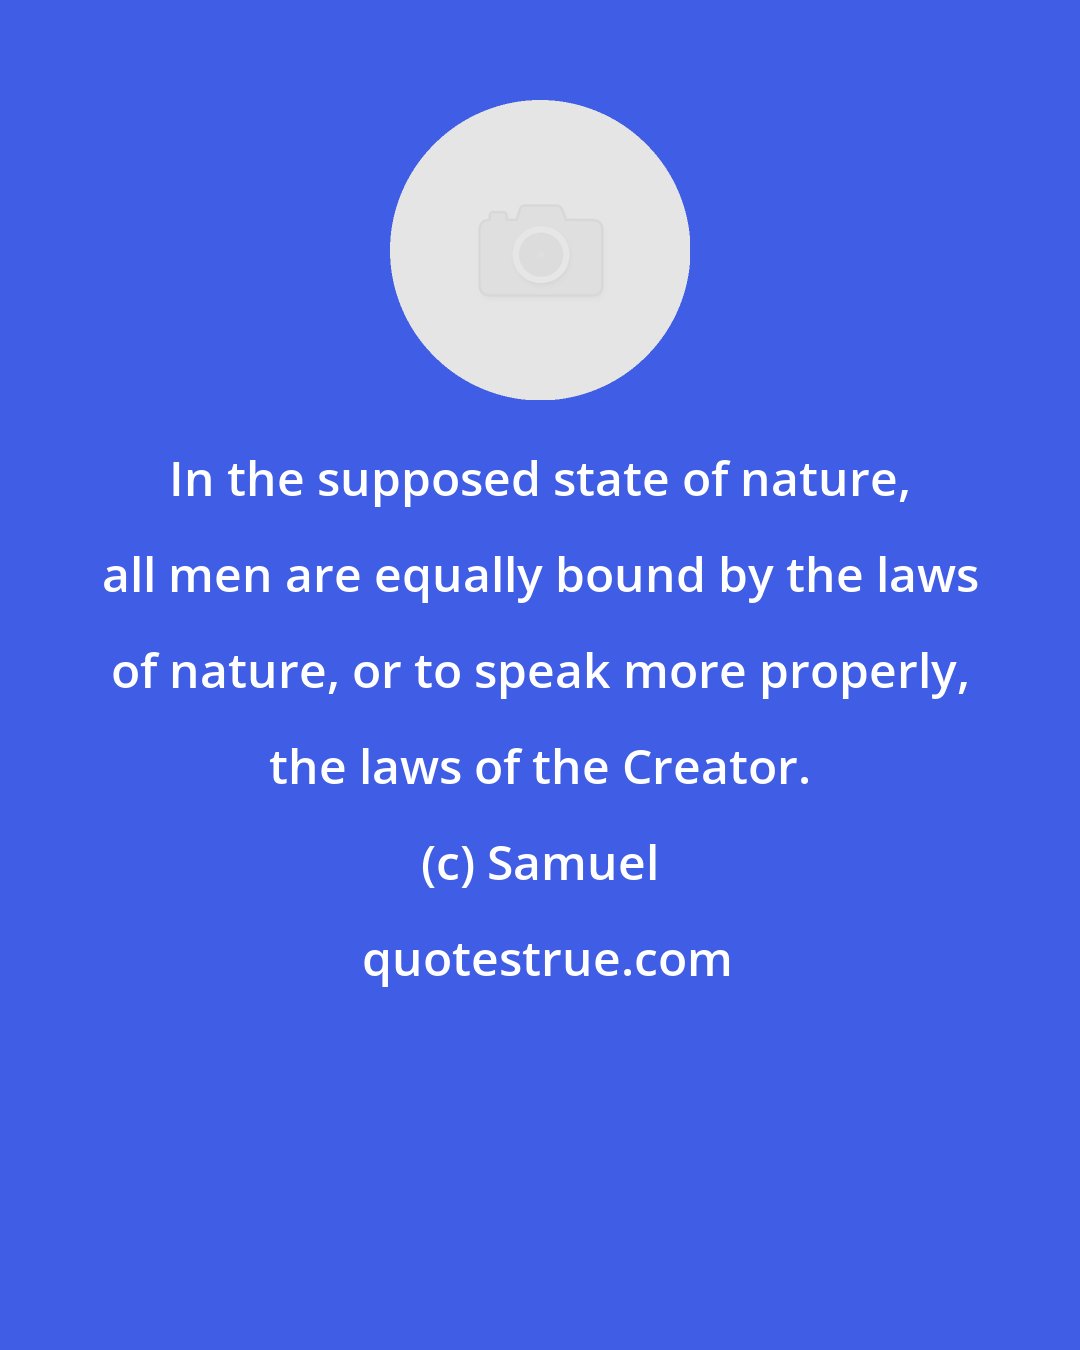 Samuel: In the supposed state of nature, all men are equally bound by the laws of nature, or to speak more properly, the laws of the Creator.